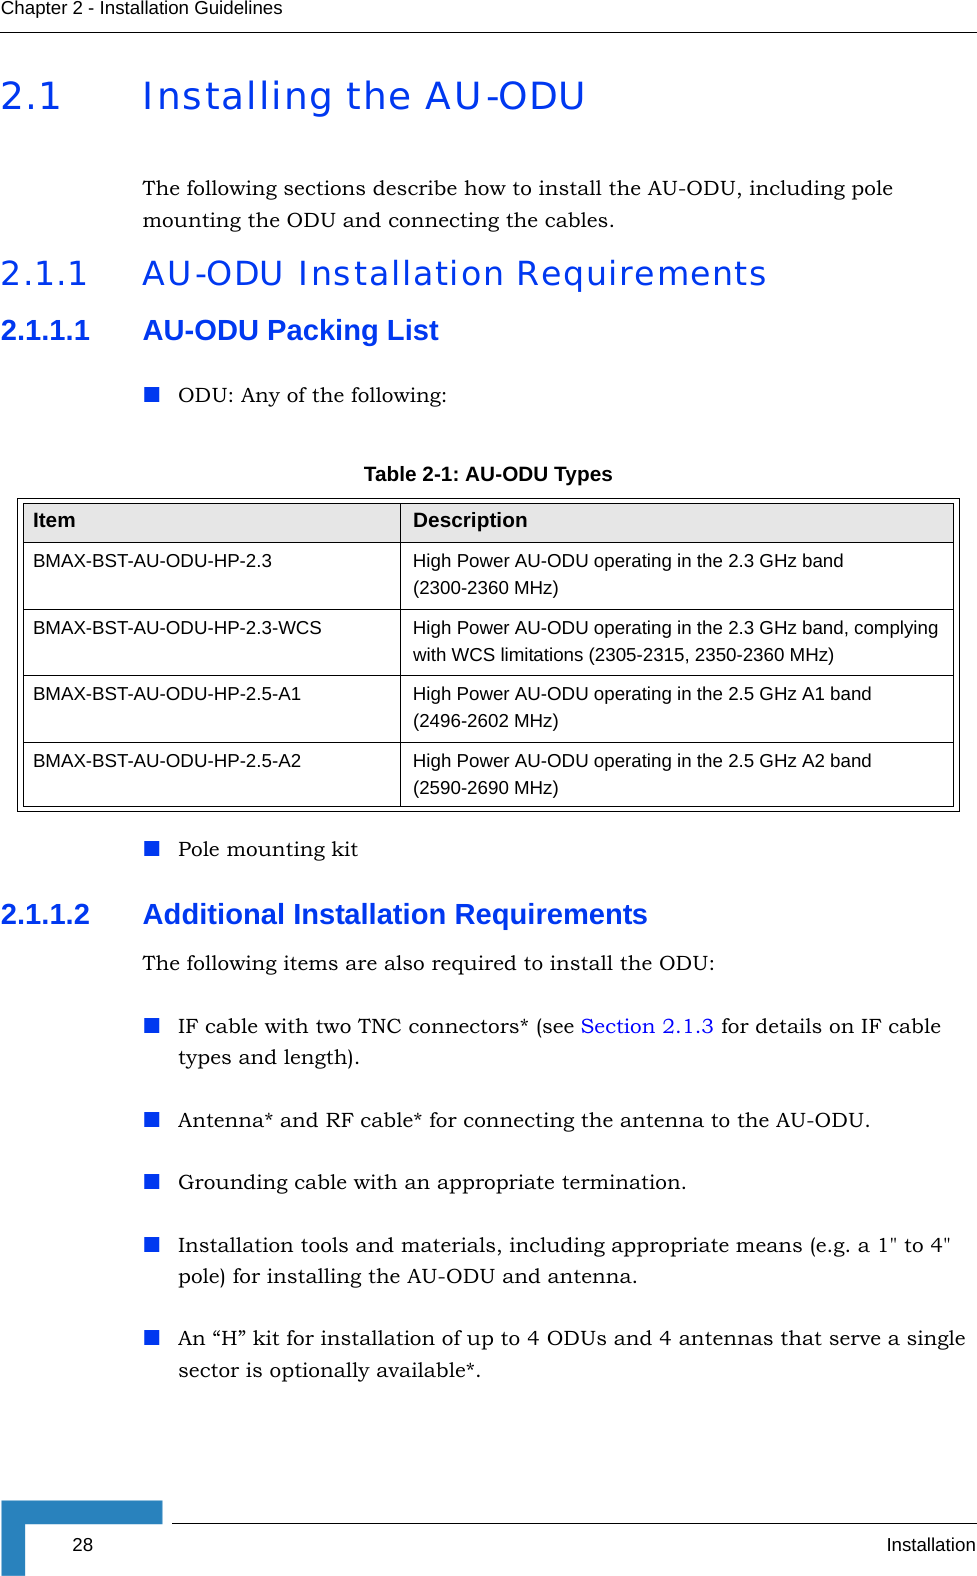 28 InstallationChapter 2 - Installation Guidelines2.1 Installing the AU-ODUThe following sections describe how to install the AU-ODU, including pole mounting the ODU and connecting the cables.2.1.1 AU-ODU Installation Requirements2.1.1.1 AU-ODU Packing ListODU: Any of the following:Pole mounting kit2.1.1.2 Additional Installation RequirementsThe following items are also required to install the ODU:IF cable with two TNC connectors* (see Section 2.1.3 for details on IF cable types and length).Antenna* and RF cable* for connecting the antenna to the AU-ODU.Grounding cable with an appropriate termination.Installation tools and materials, including appropriate means (e.g. a 1&quot; to 4&quot; pole) for installing the AU-ODU and antenna. An “H” kit for installation of up to 4 ODUs and 4 antennas that serve a single sector is optionally available*.Table 2-1: AU-ODU TypesItem DescriptionBMAX-BST-AU-ODU-HP-2.3 High Power AU-ODU operating in the 2.3 GHz band (2300-2360 MHz)BMAX-BST-AU-ODU-HP-2.3-WCS High Power AU-ODU operating in the 2.3 GHz band, complying with WCS limitations (2305-2315, 2350-2360 MHz)BMAX-BST-AU-ODU-HP-2.5-A1 High Power AU-ODU operating in the 2.5 GHz A1 band (2496-2602 MHz)BMAX-BST-AU-ODU-HP-2.5-A2 High Power AU-ODU operating in the 2.5 GHz A2 band (2590-2690 MHz)